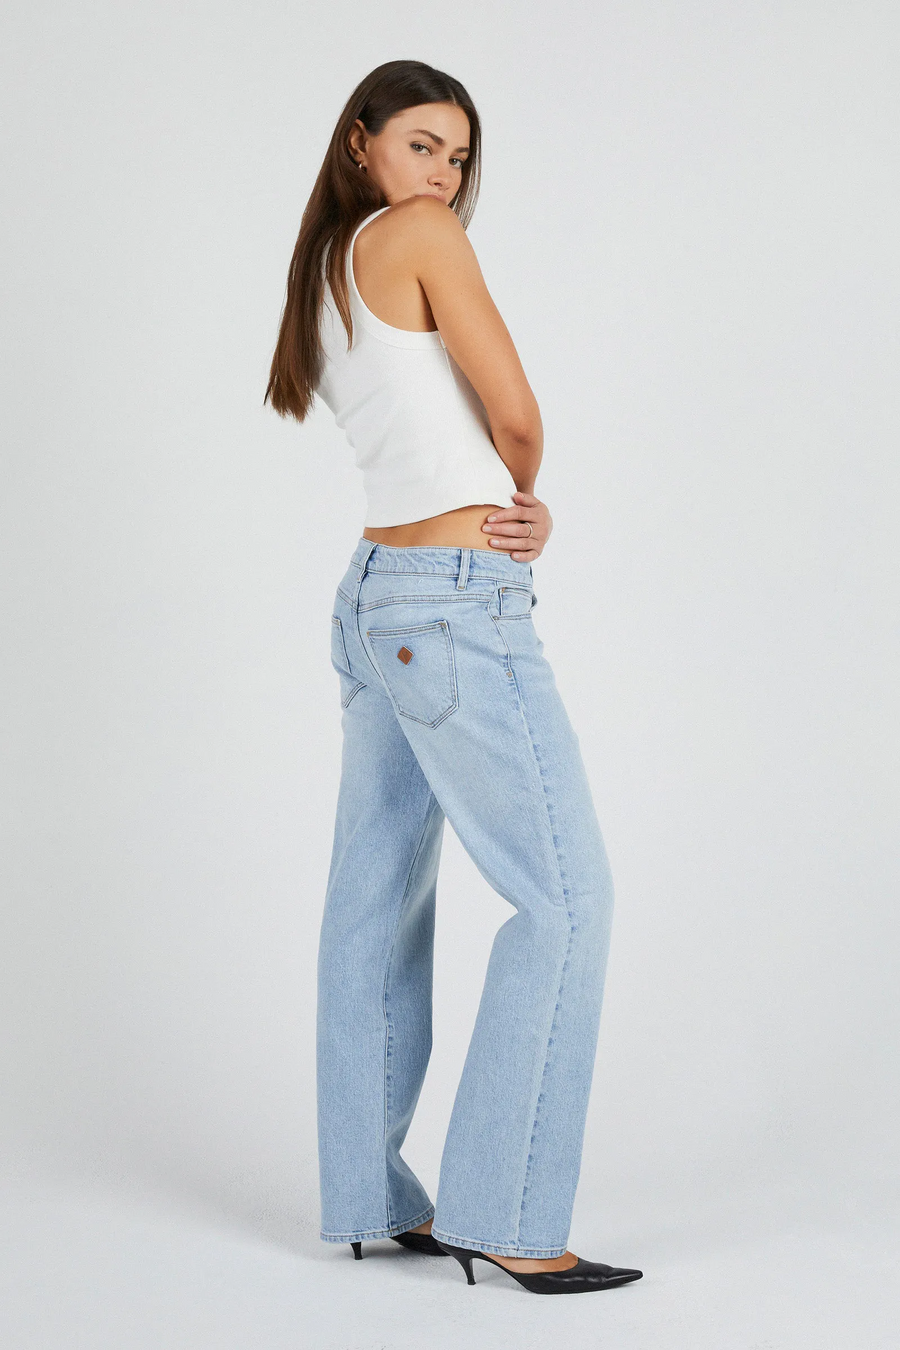 99 Baggy Jean Gina Recyled by Abrand Jeans